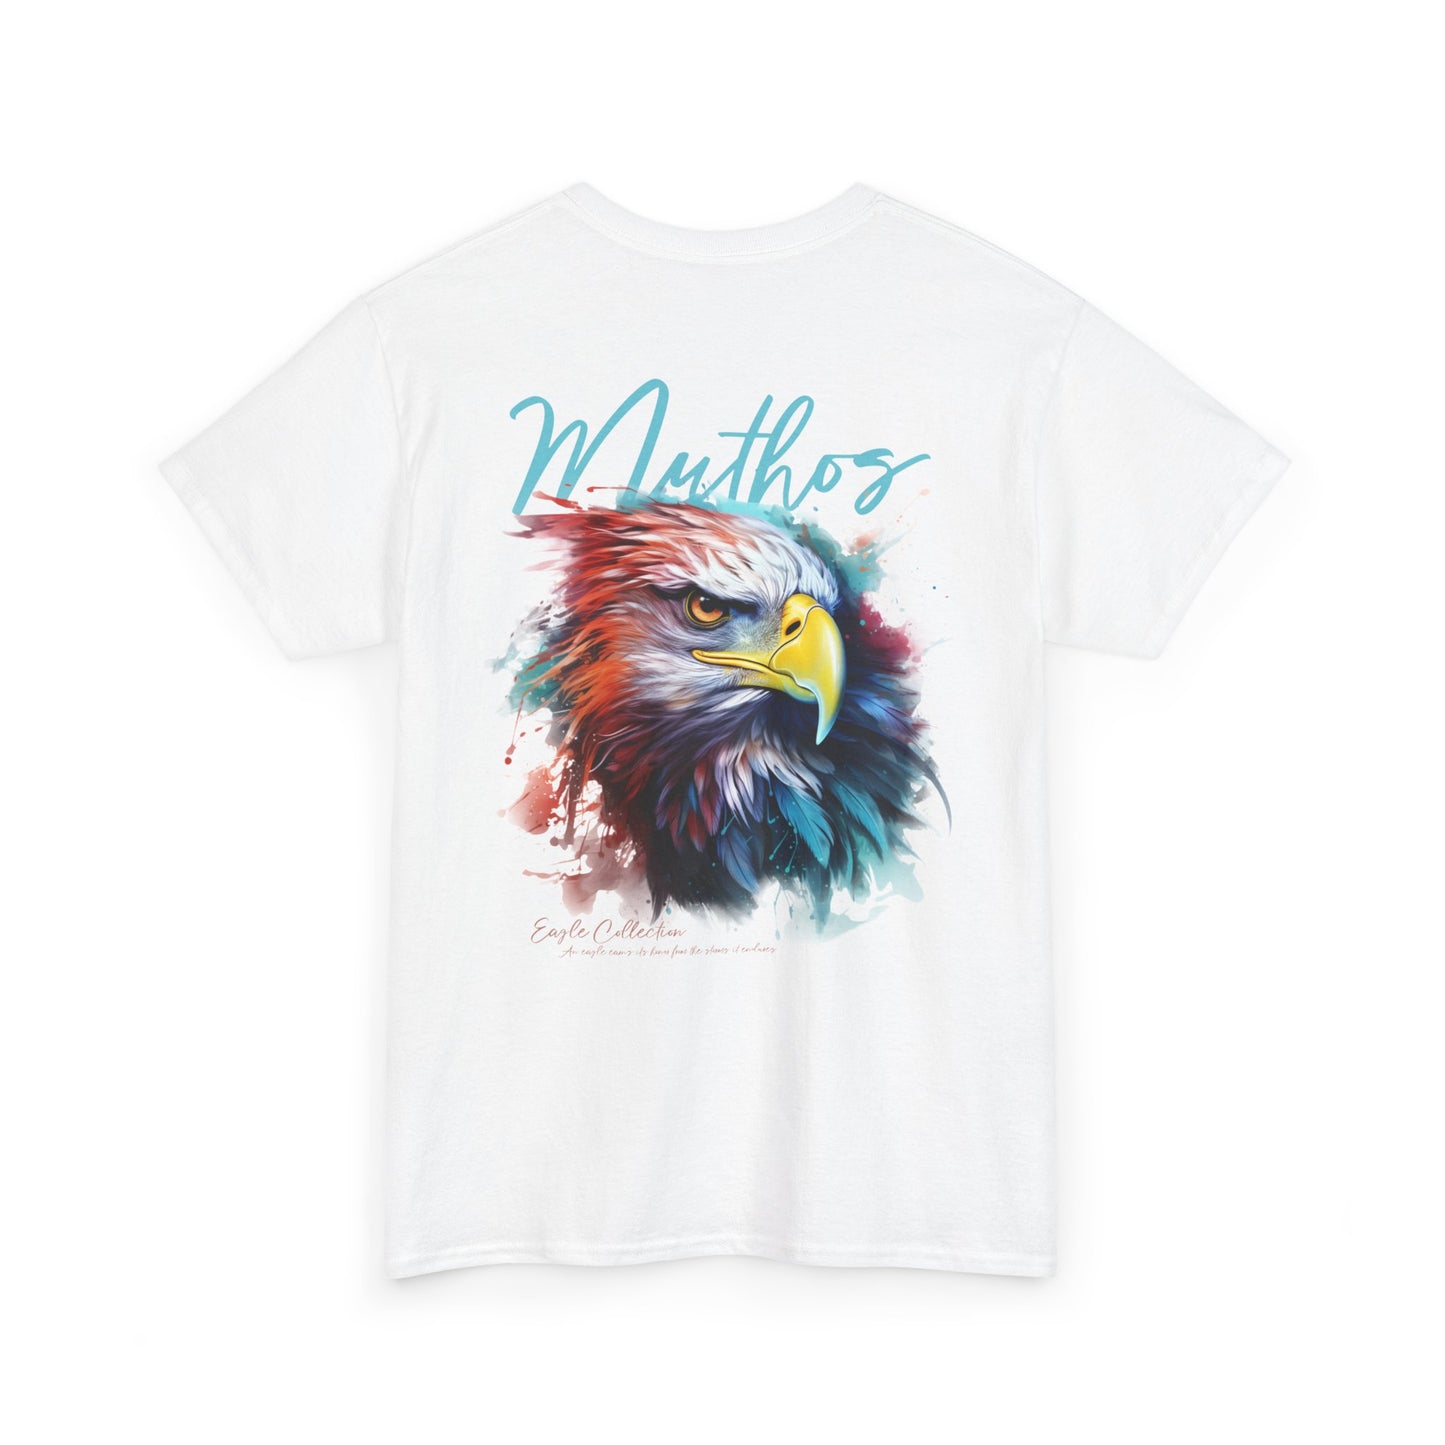 The Eagle Collection Mixed™ T-Shirt